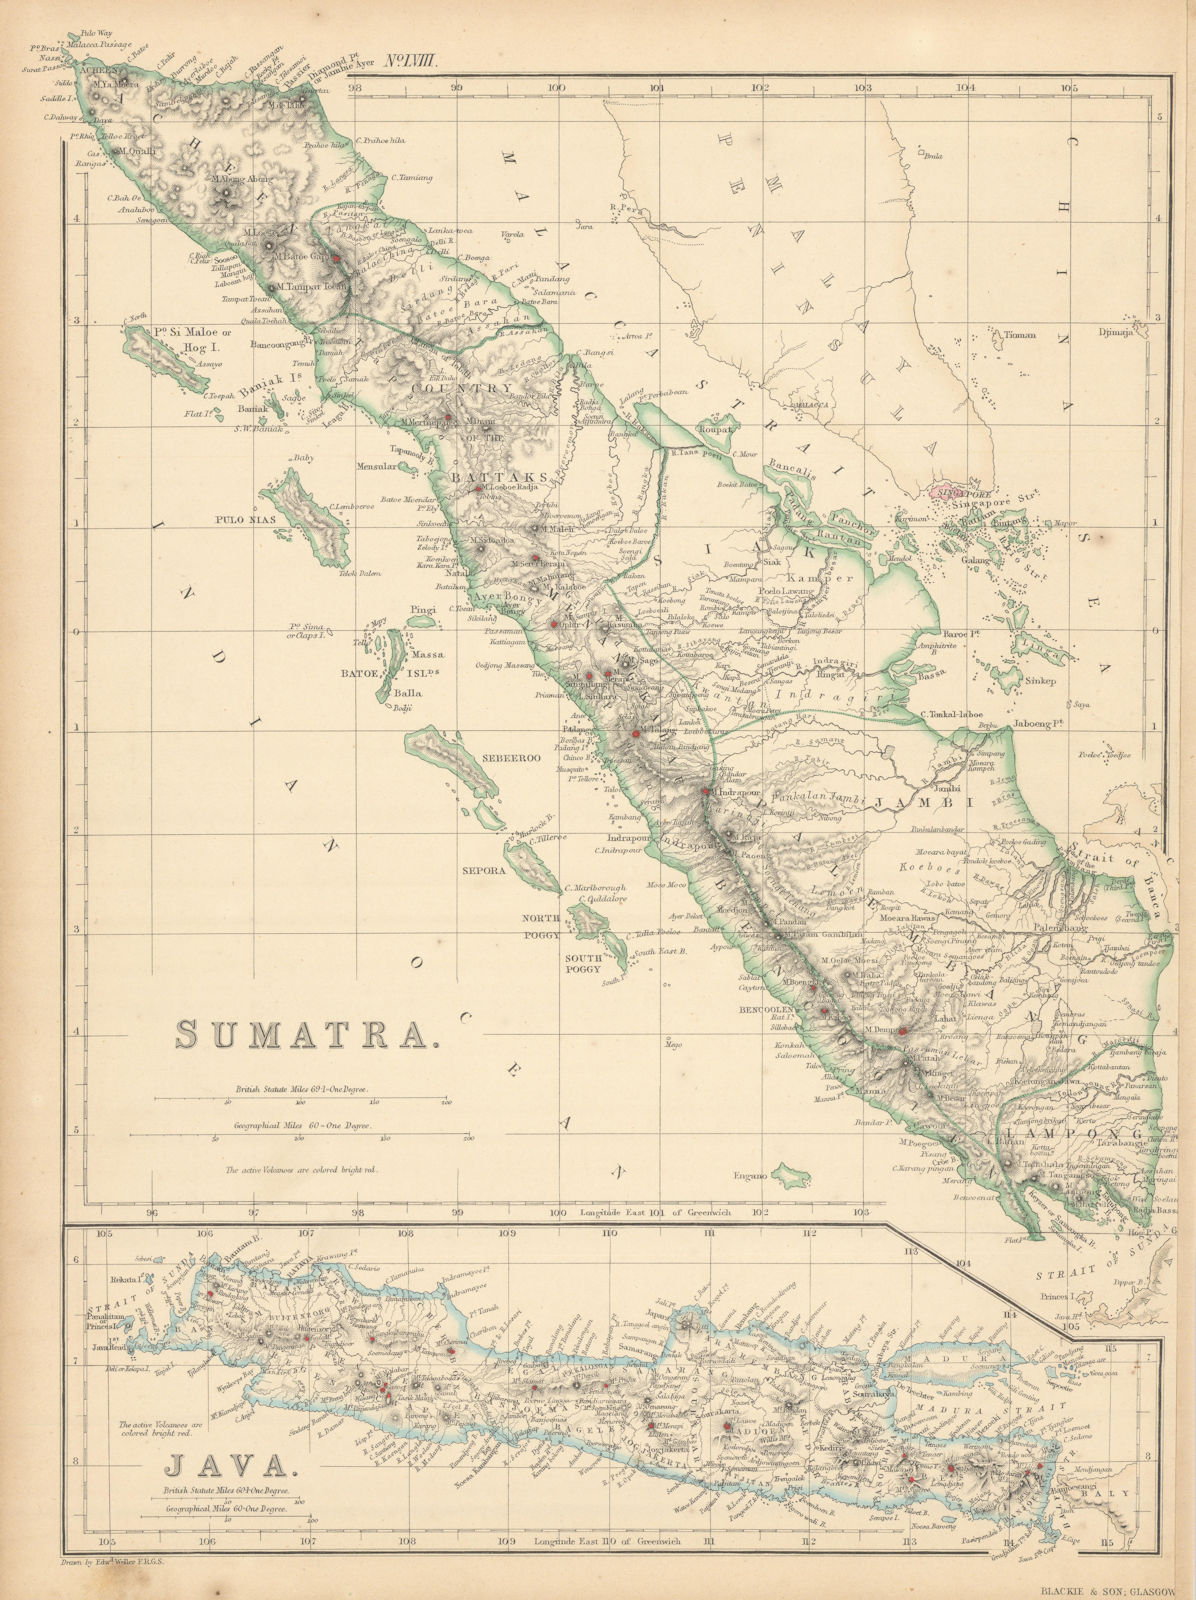 Sumatra & Java showing volcanoes by Edward Weller. Indonesia 1859 old map